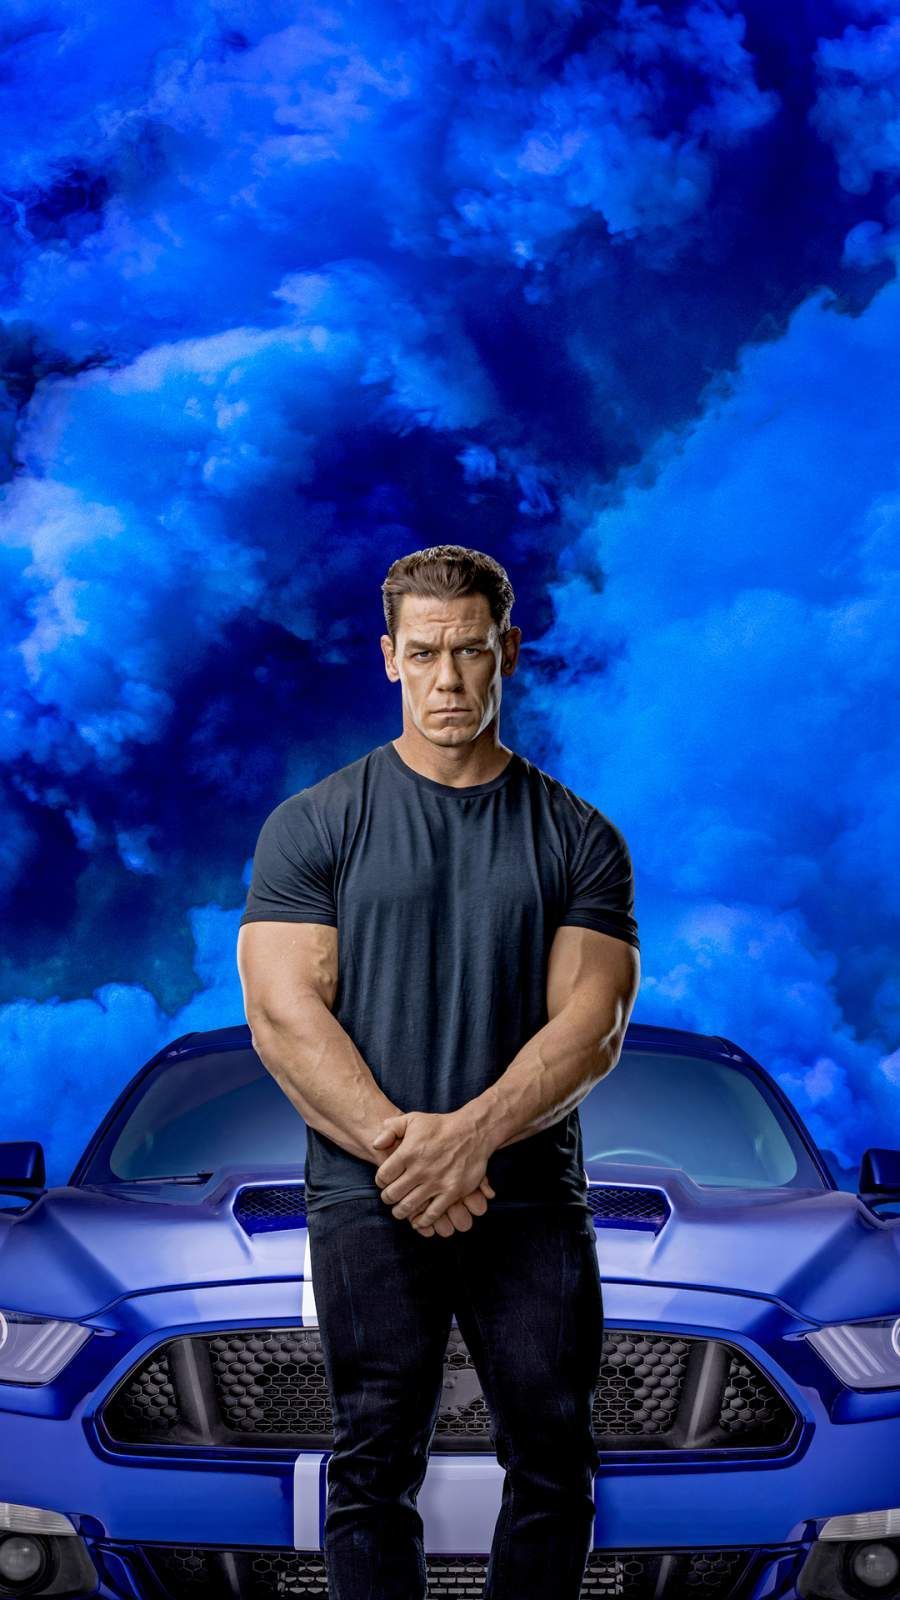 iPhone Wallpaper for iPhone iPhone iPhone X, iPhone XR, iPhone 8 Plus High Quality Wallpaper, iPad Backgrou. Fast and furious, John cena, Movie releases